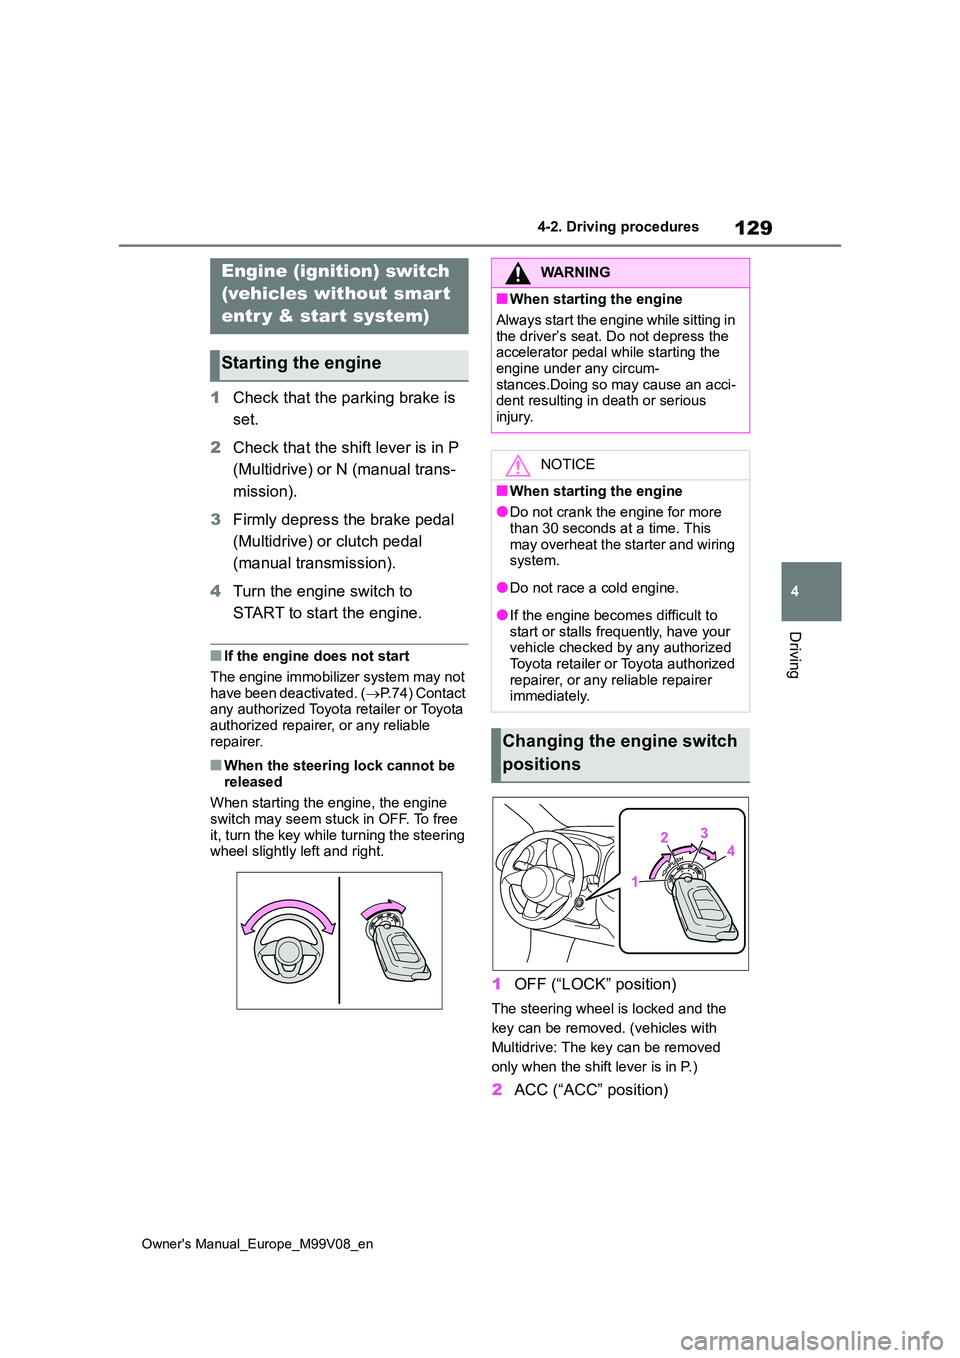 TOYOTA AYGO X 2022  Owners Manual (in English) 129
4
Owner's Manual_Europe_M99V08_en
4-2. Driving procedures
Driving
4-2.Driving pro cedu res
1Check that the parking brake is  
set. 
2 Check that the shift lever is in P  
(Multidrive) or N (ma